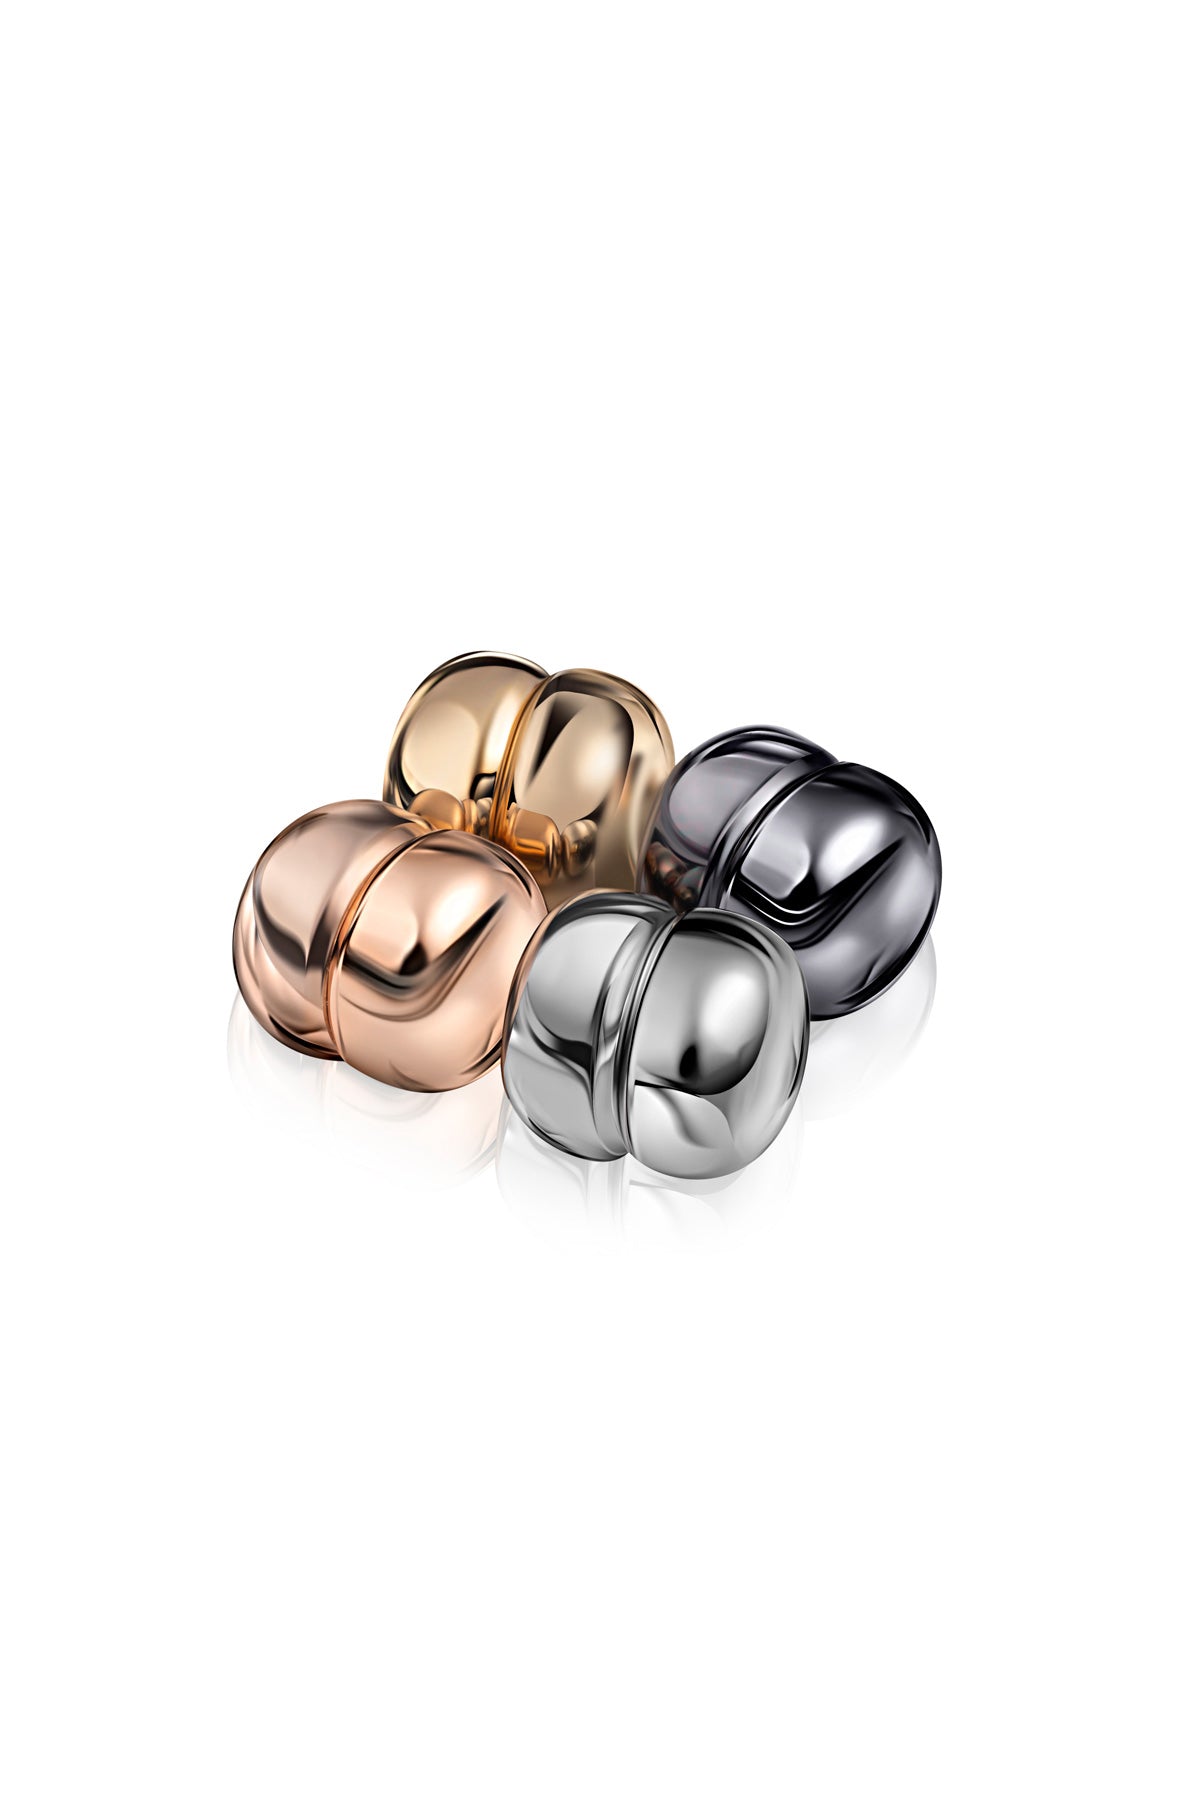 Gold, Rose Gold, Silver, and Gunmetal